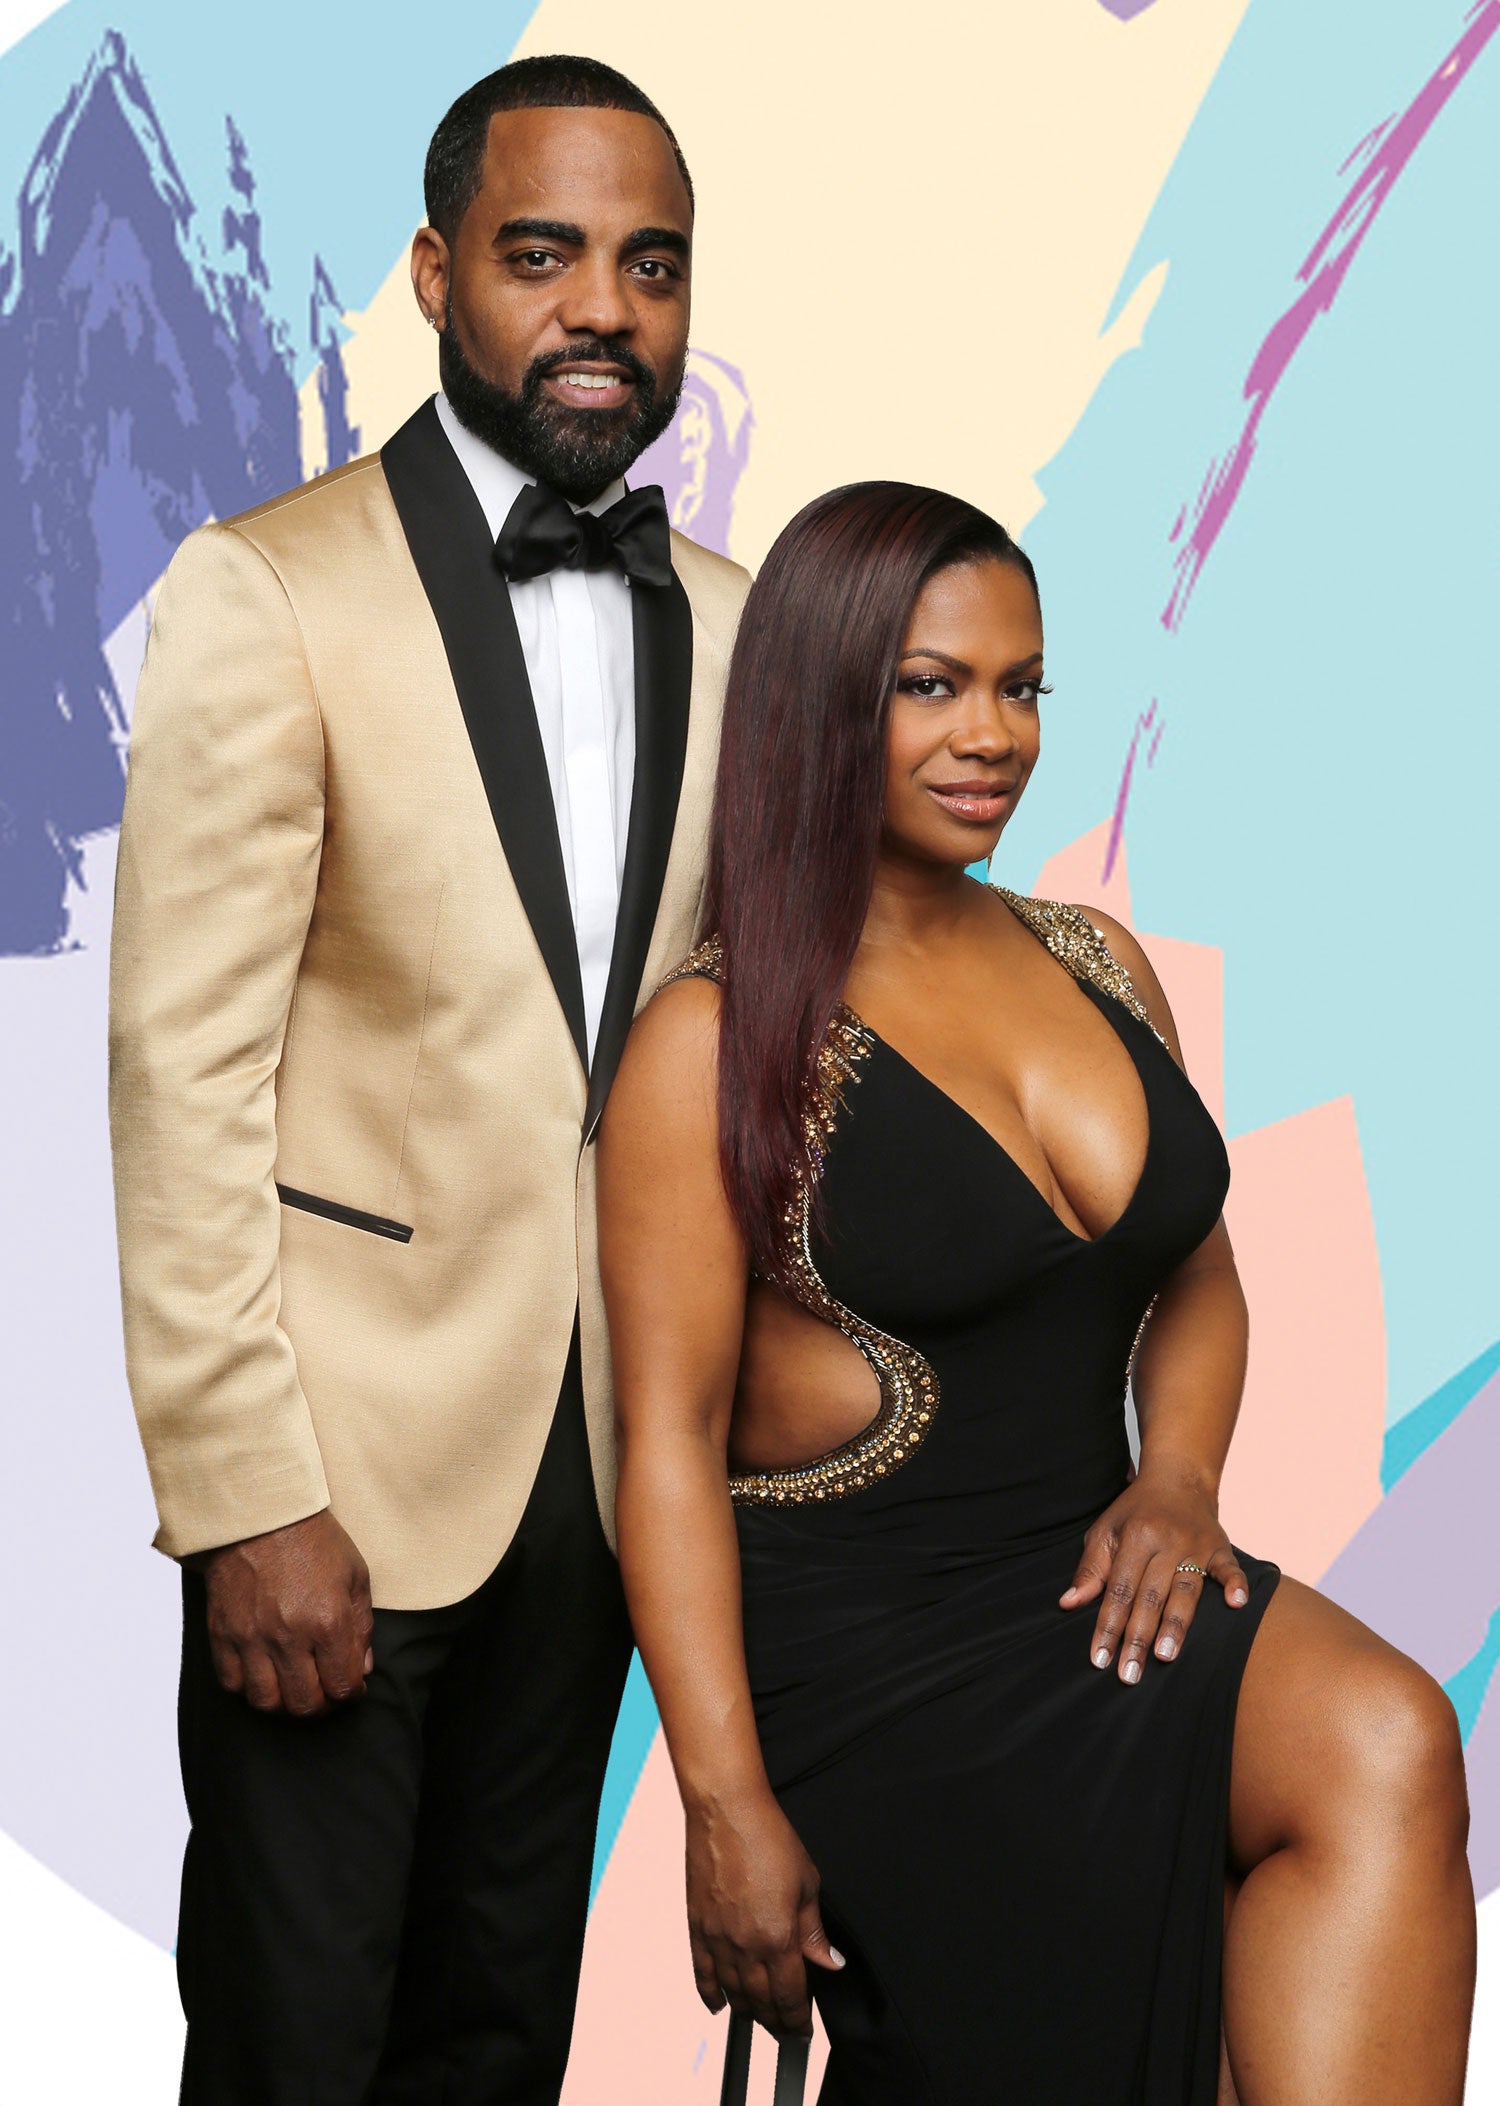 Kandi Burruss Explains Why Her Marriage To Todd Tucker Works: 'I Don't Get Bored With Him'